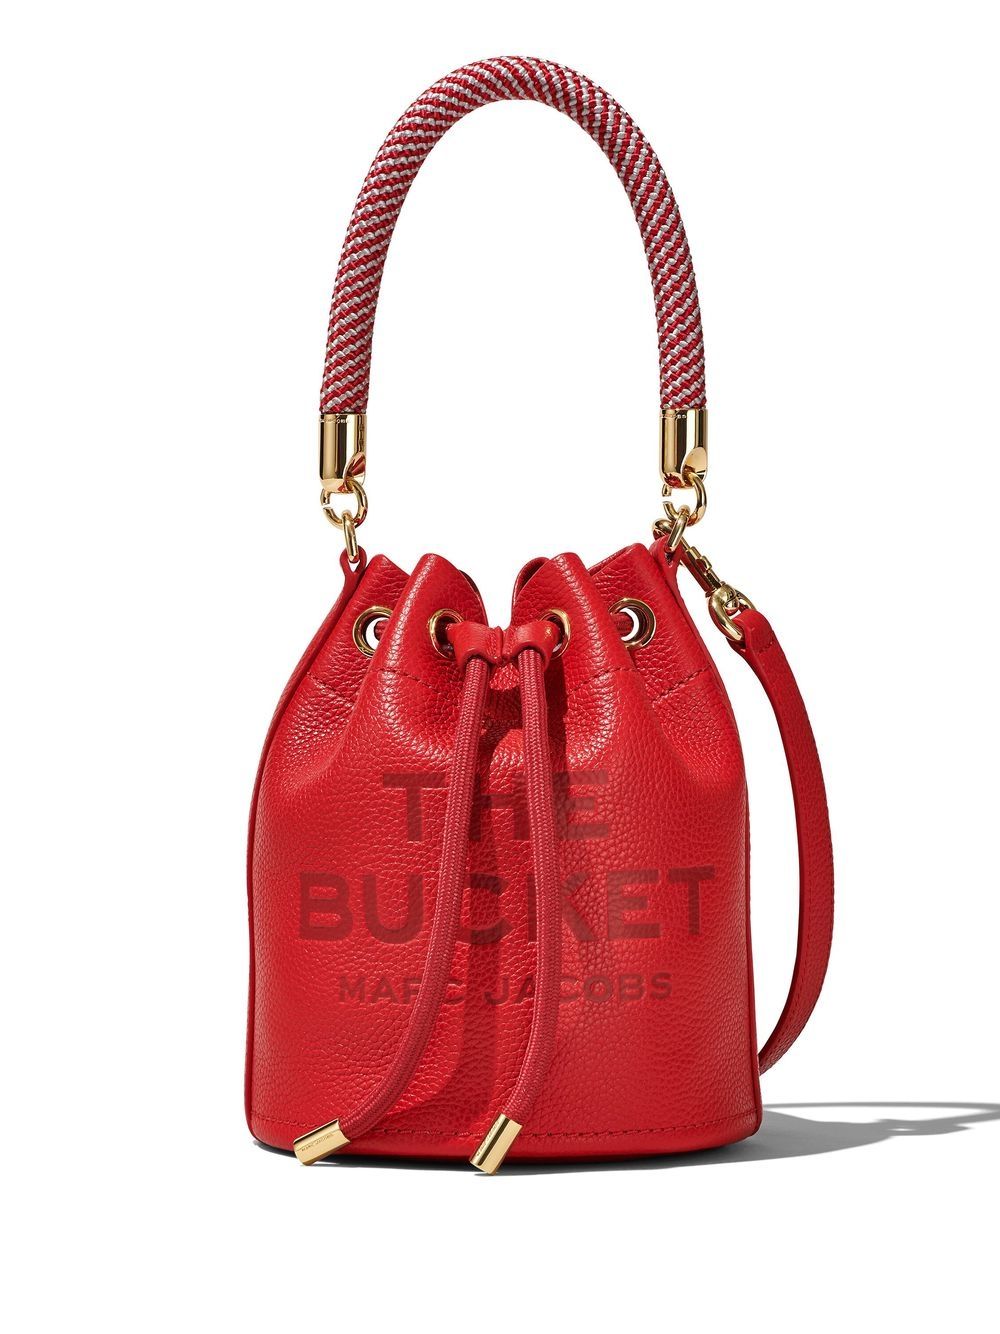 MARC JACOBS Stylish 617 Cow Leather Bucket Bag for Women